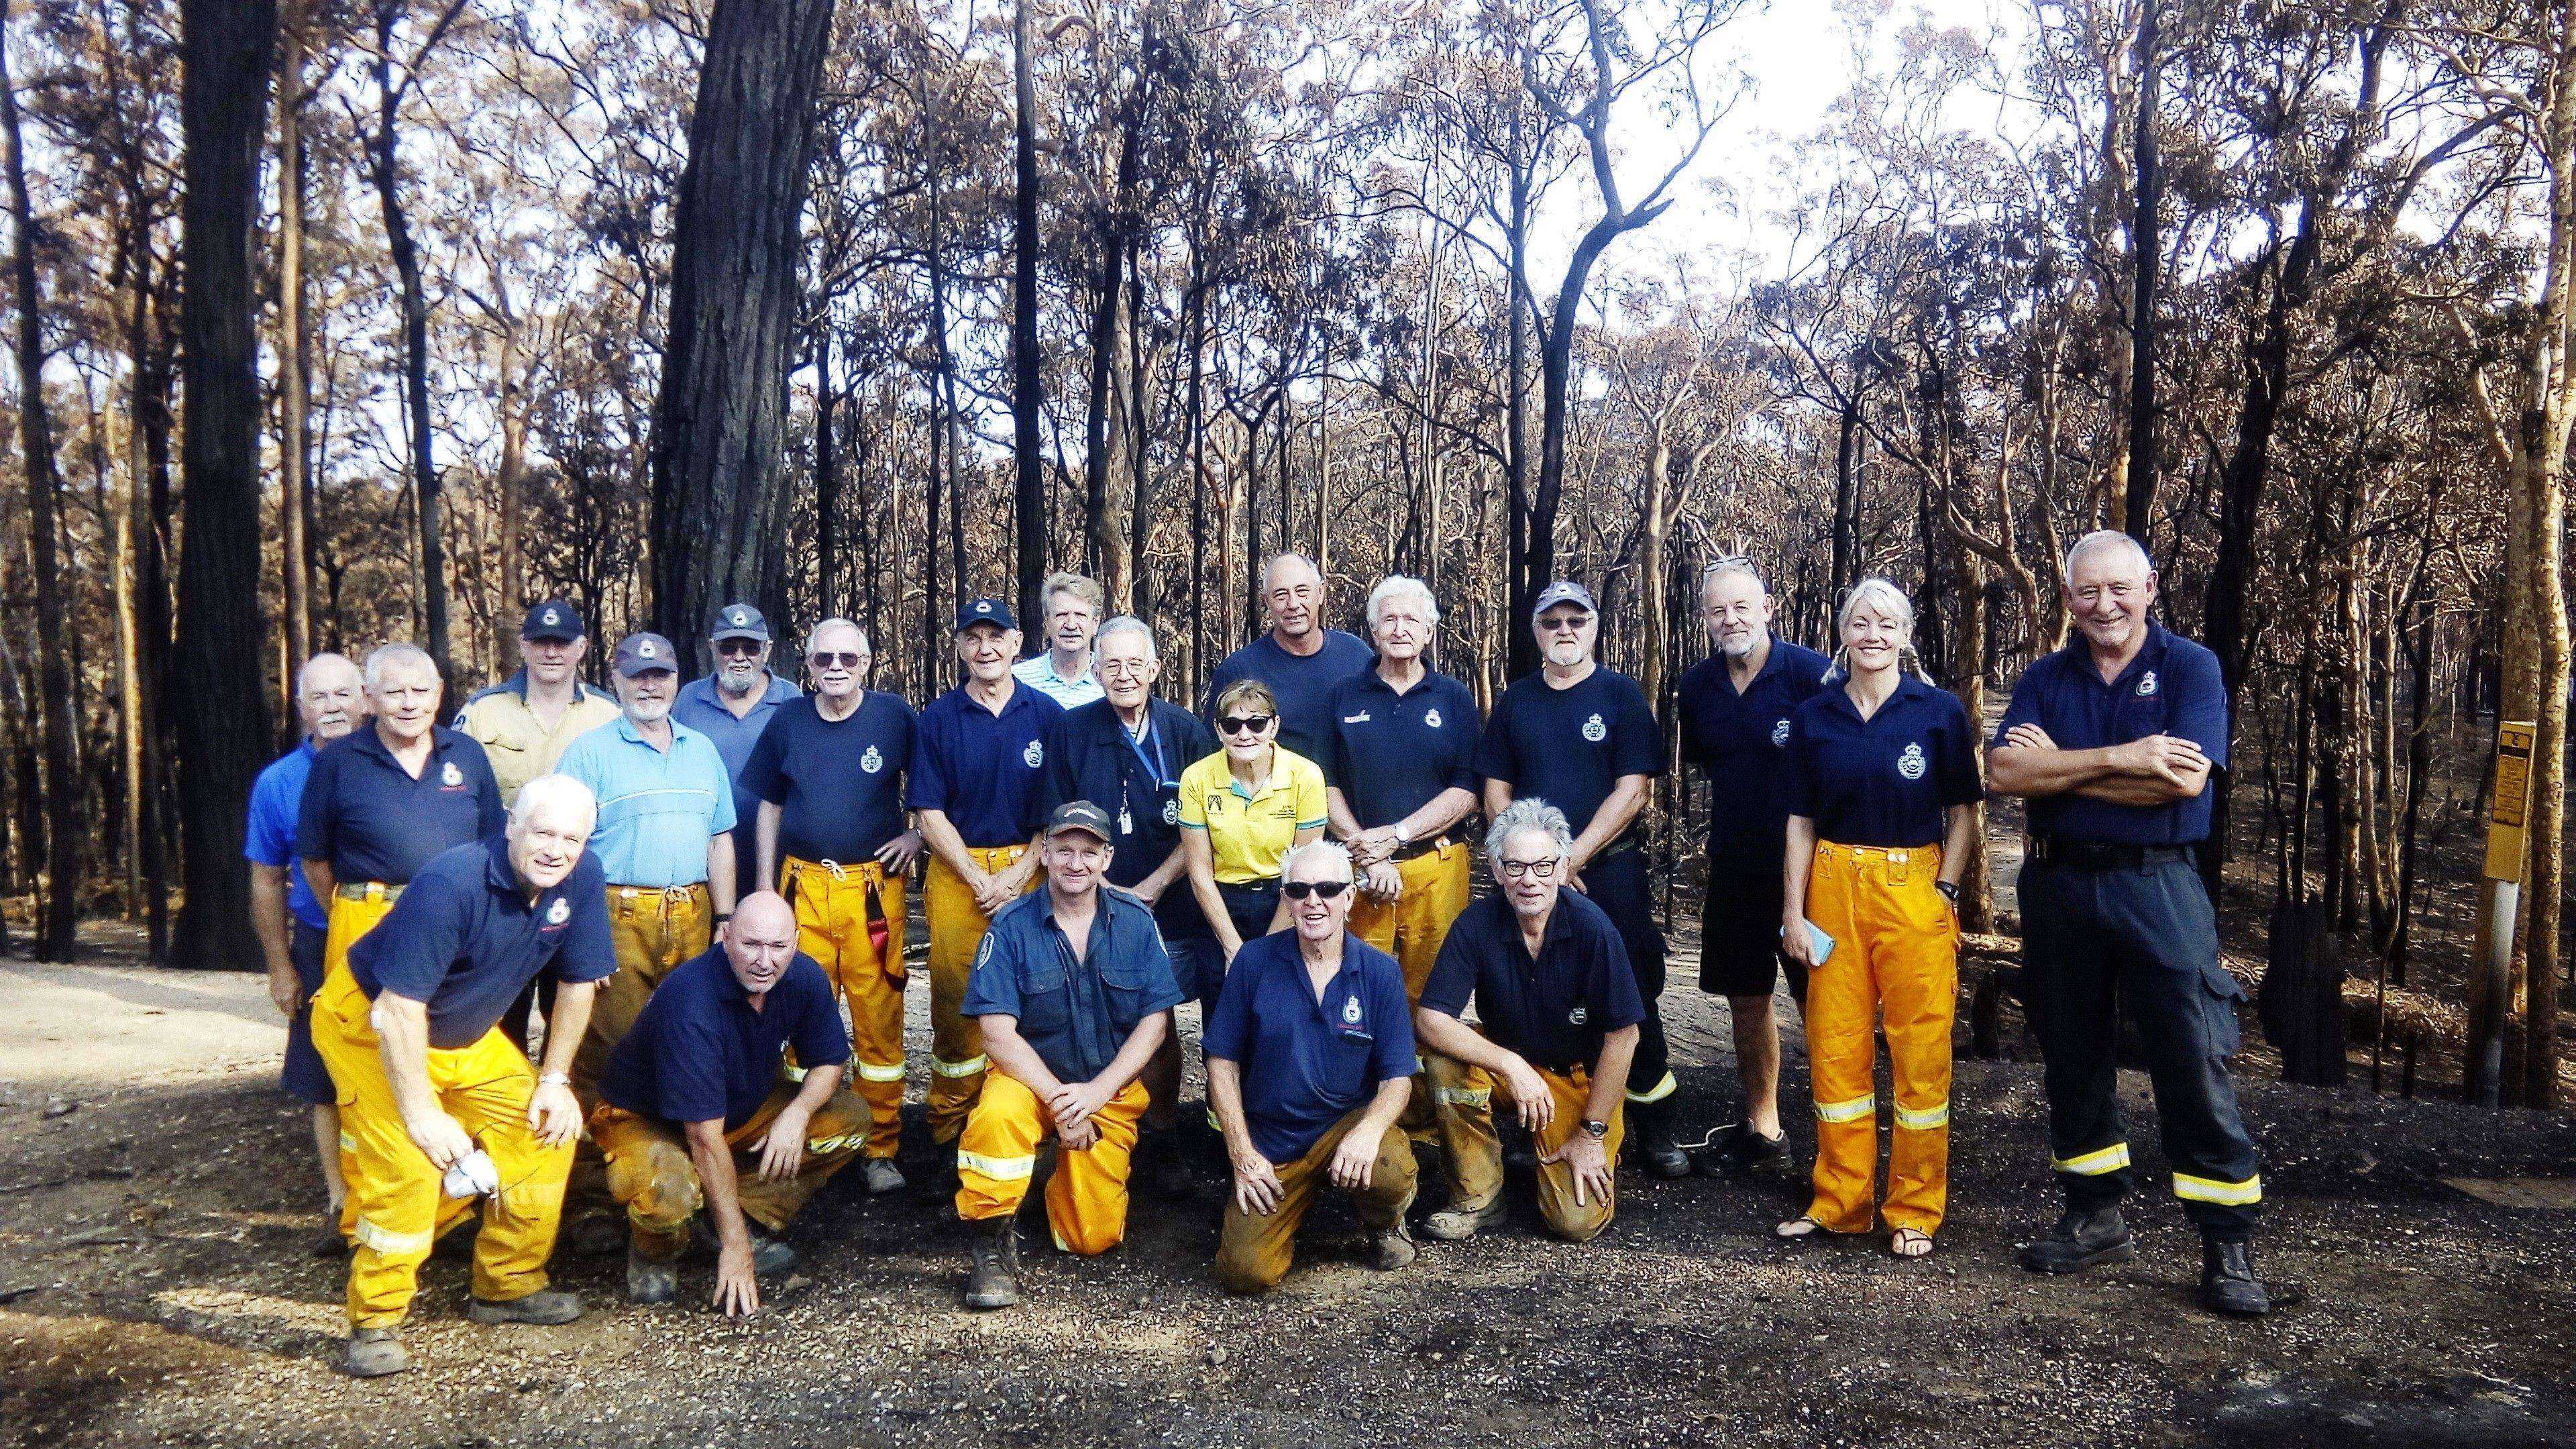 Malua Bay Rural Fire Brigade urges community to reconnect